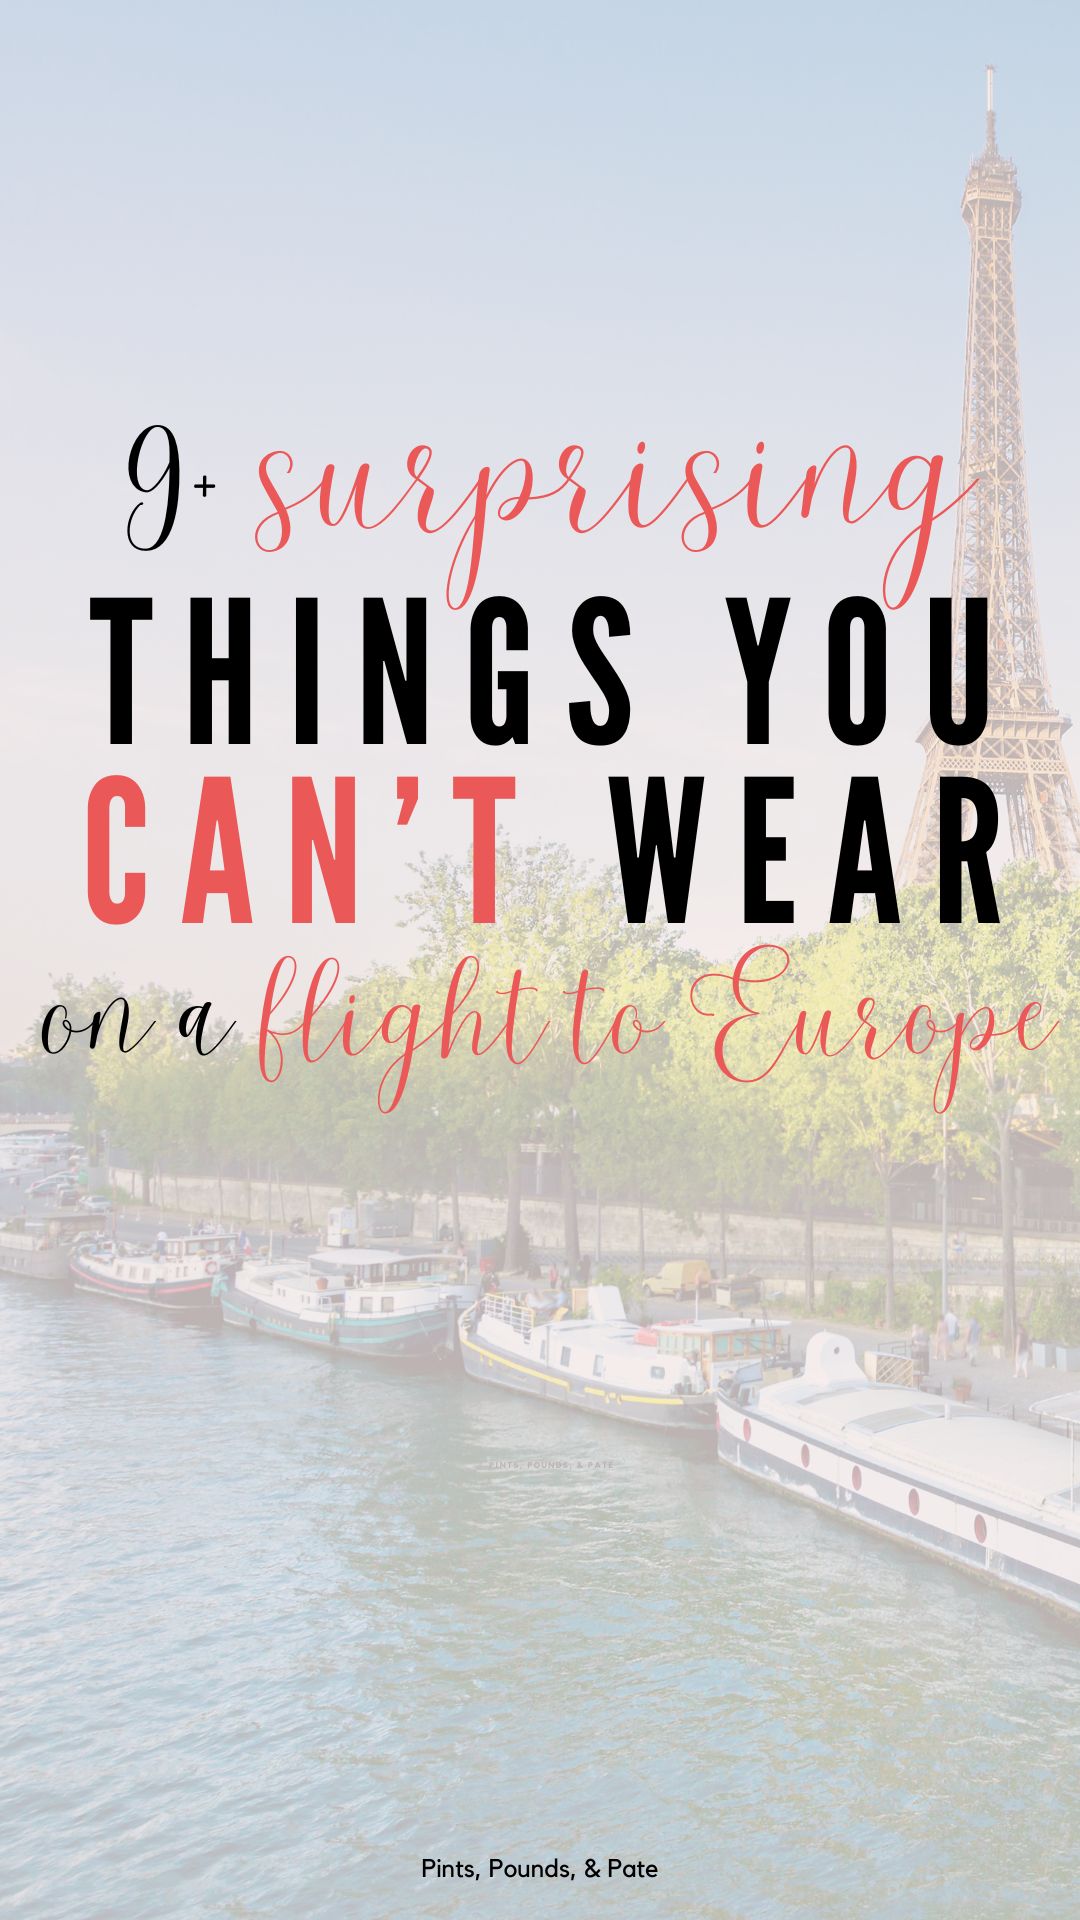 9+ Surprising Things You Can't Wear on a Flight to Europe